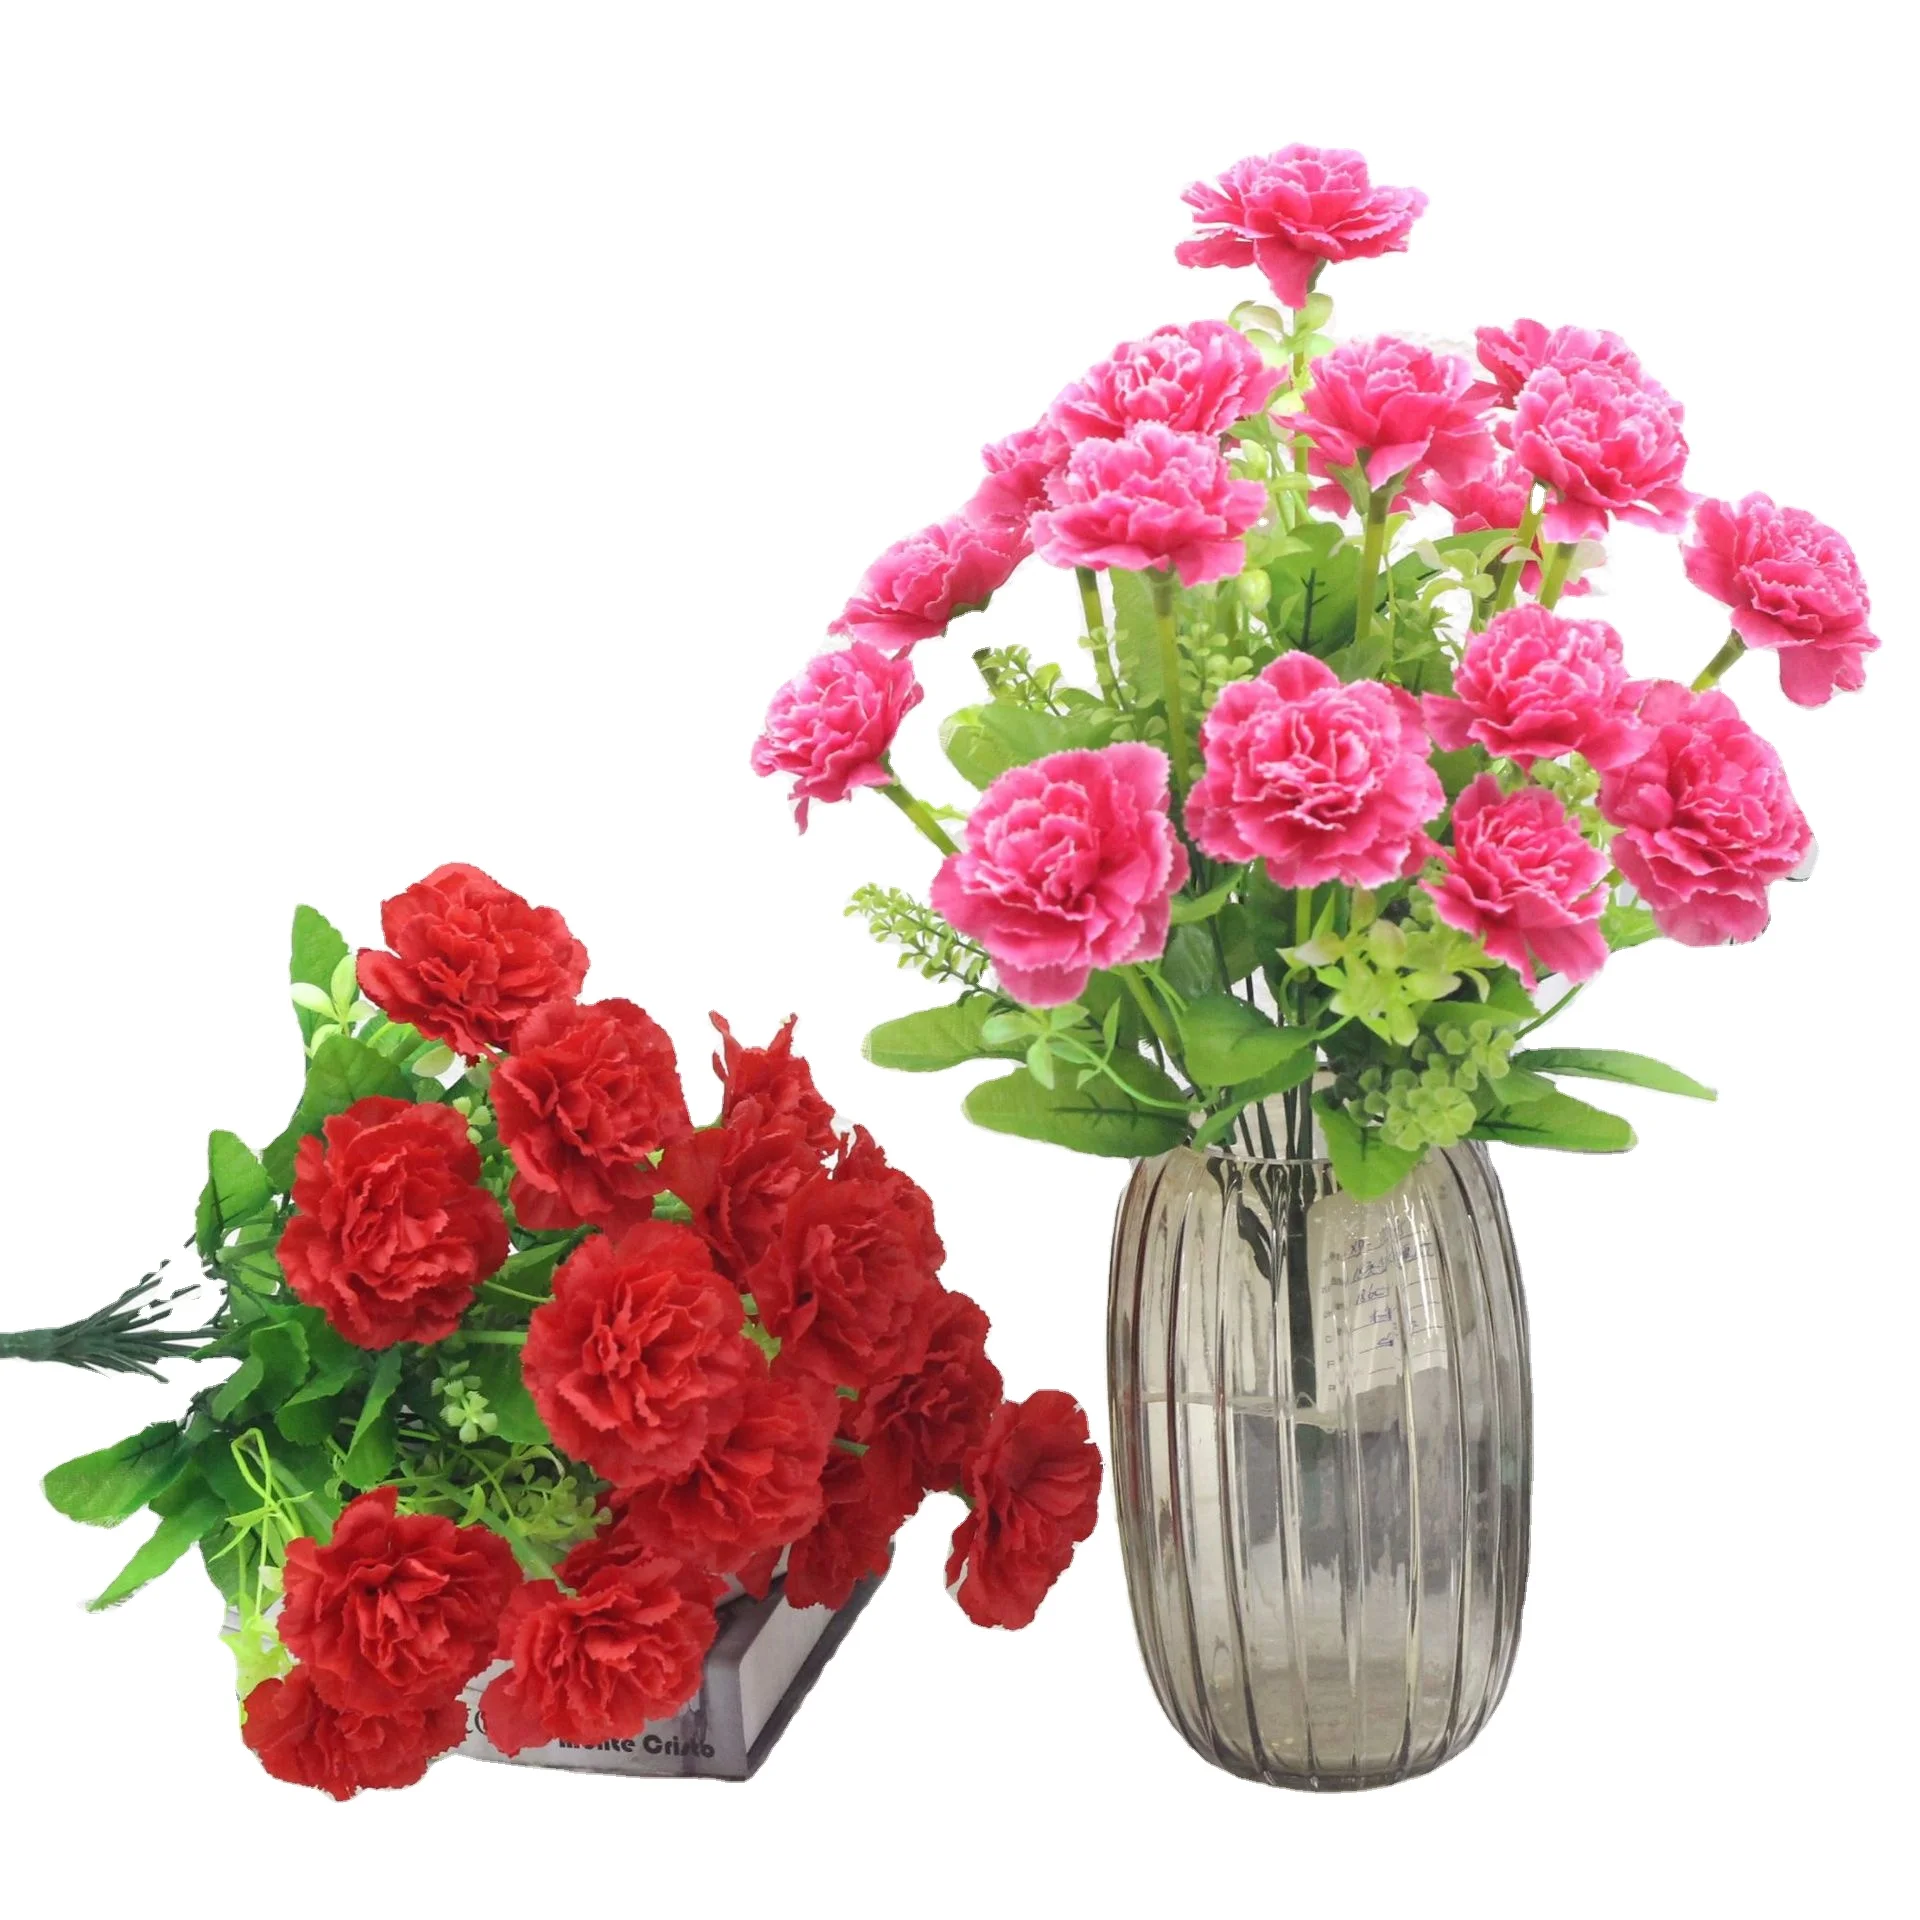 Factory Directly Sell Artificial Flowers Easy To Clean Artificial Decorative Carnation Flowers For Home Decoration Buy Artificial Flowers Artificial Decorative Carnation Flowers Carnation Flowers Product On Alibaba Com